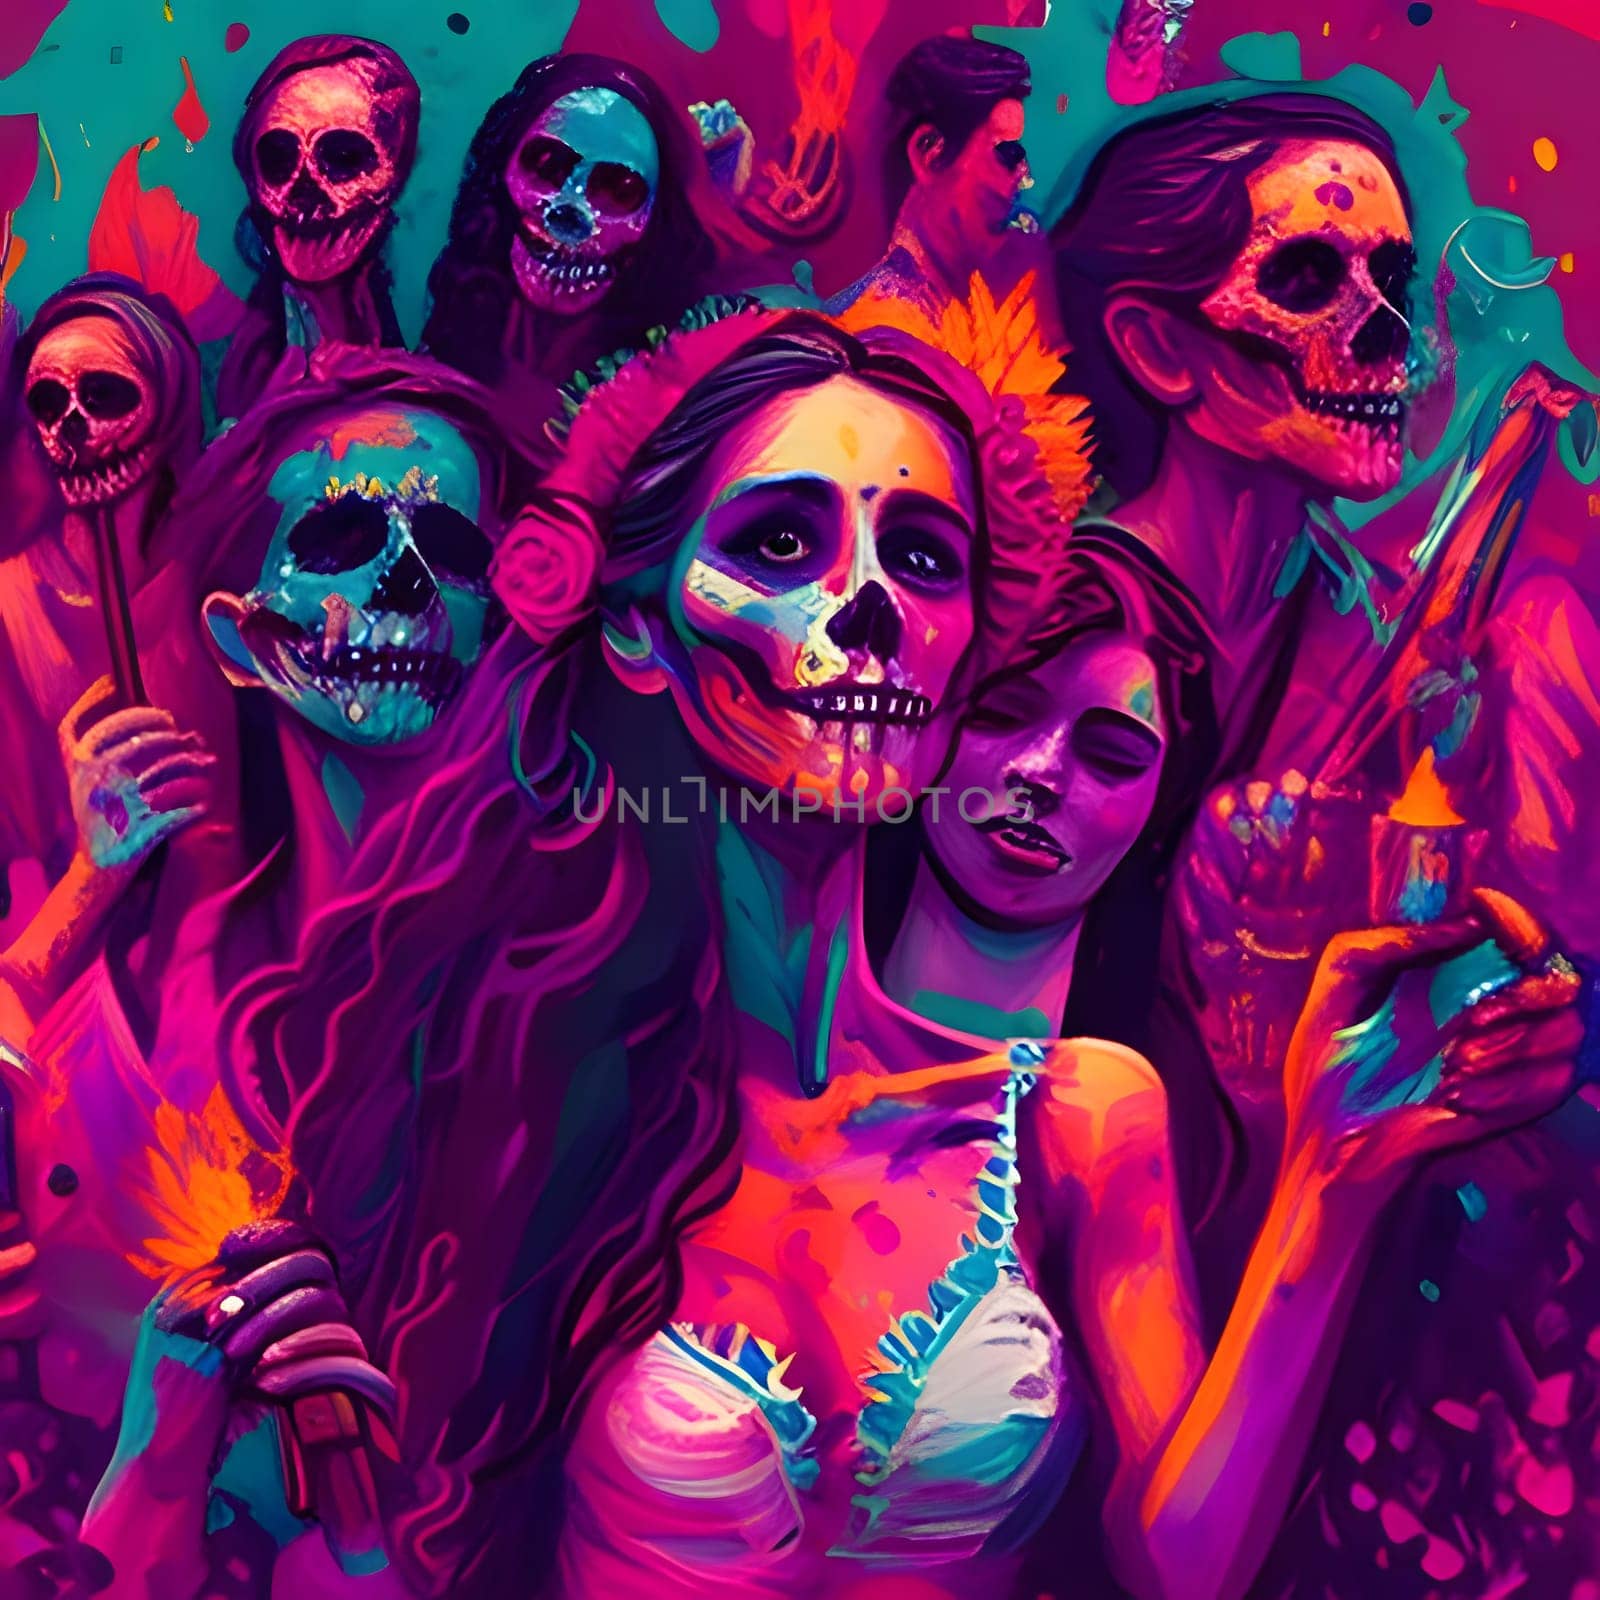 Dark images of people wearing skull skeleton masks on a colorful pink background. For the day of the dead and Halloween. Atmosphere of death and solemnity.